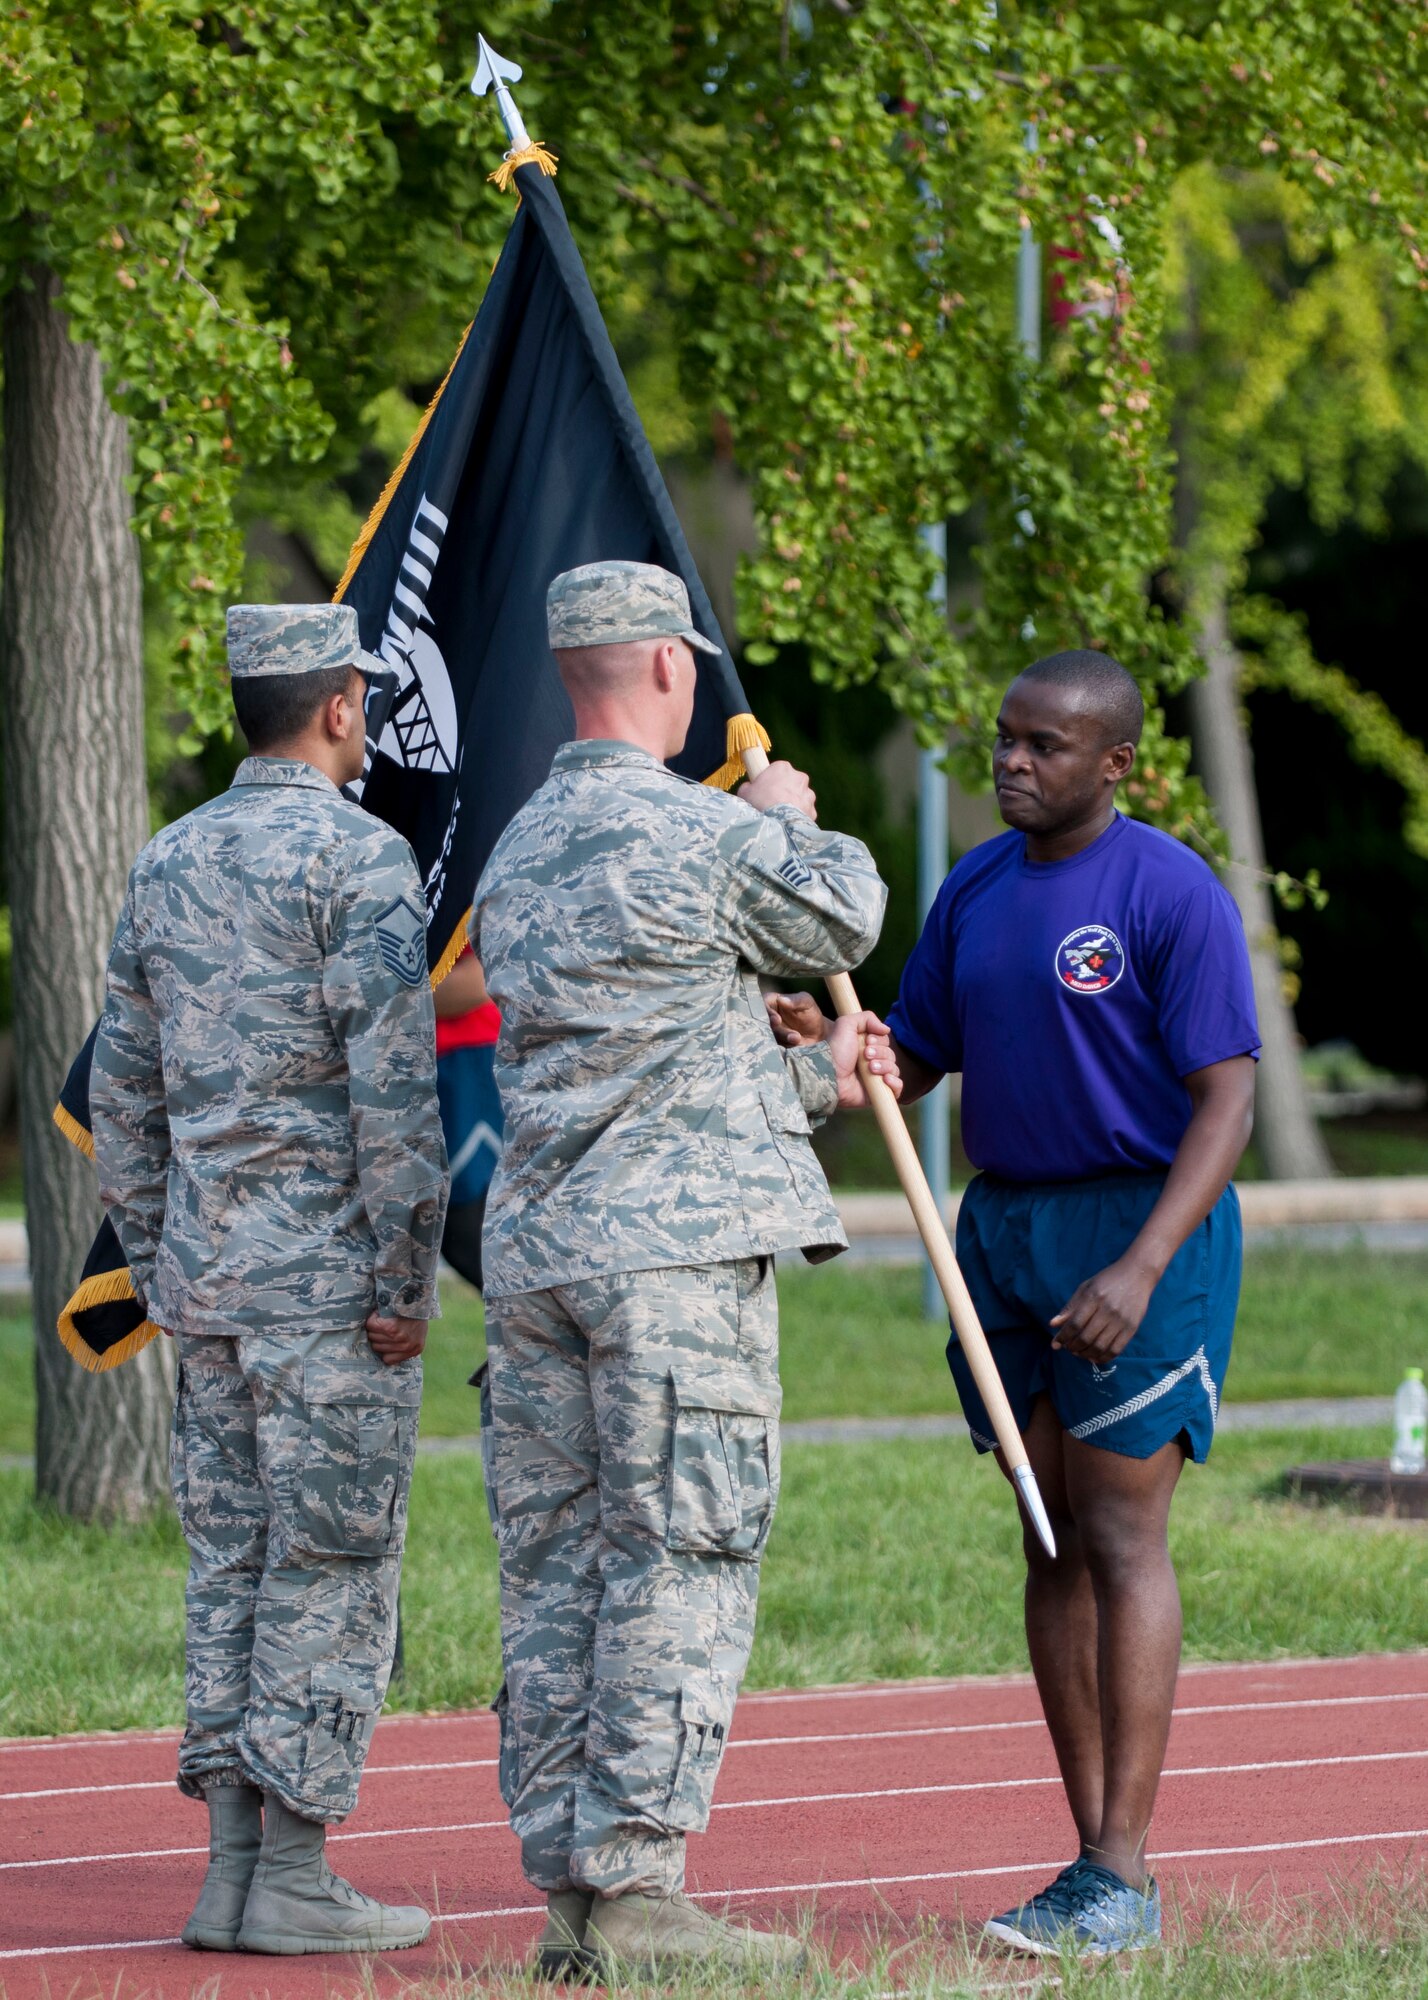 U.S. Air Force Airmen conclude running with the Prisoner of War and Missing in Action flag during the POW/MIA Recognition Day at Kunsan Air Base, Republic of Korea, Sept. 15, 2017. Kunsan Airman and Soldiers participated in a 24-hour run in recognition of POW/MIA service members. According to the Defense POW/MIA Accounting Agency, there are still 82,467 Americans still missing from past conflicts dating back to World War II. (U.S. Air Force photo by Staff Sgt. Victoria H. Taylor)